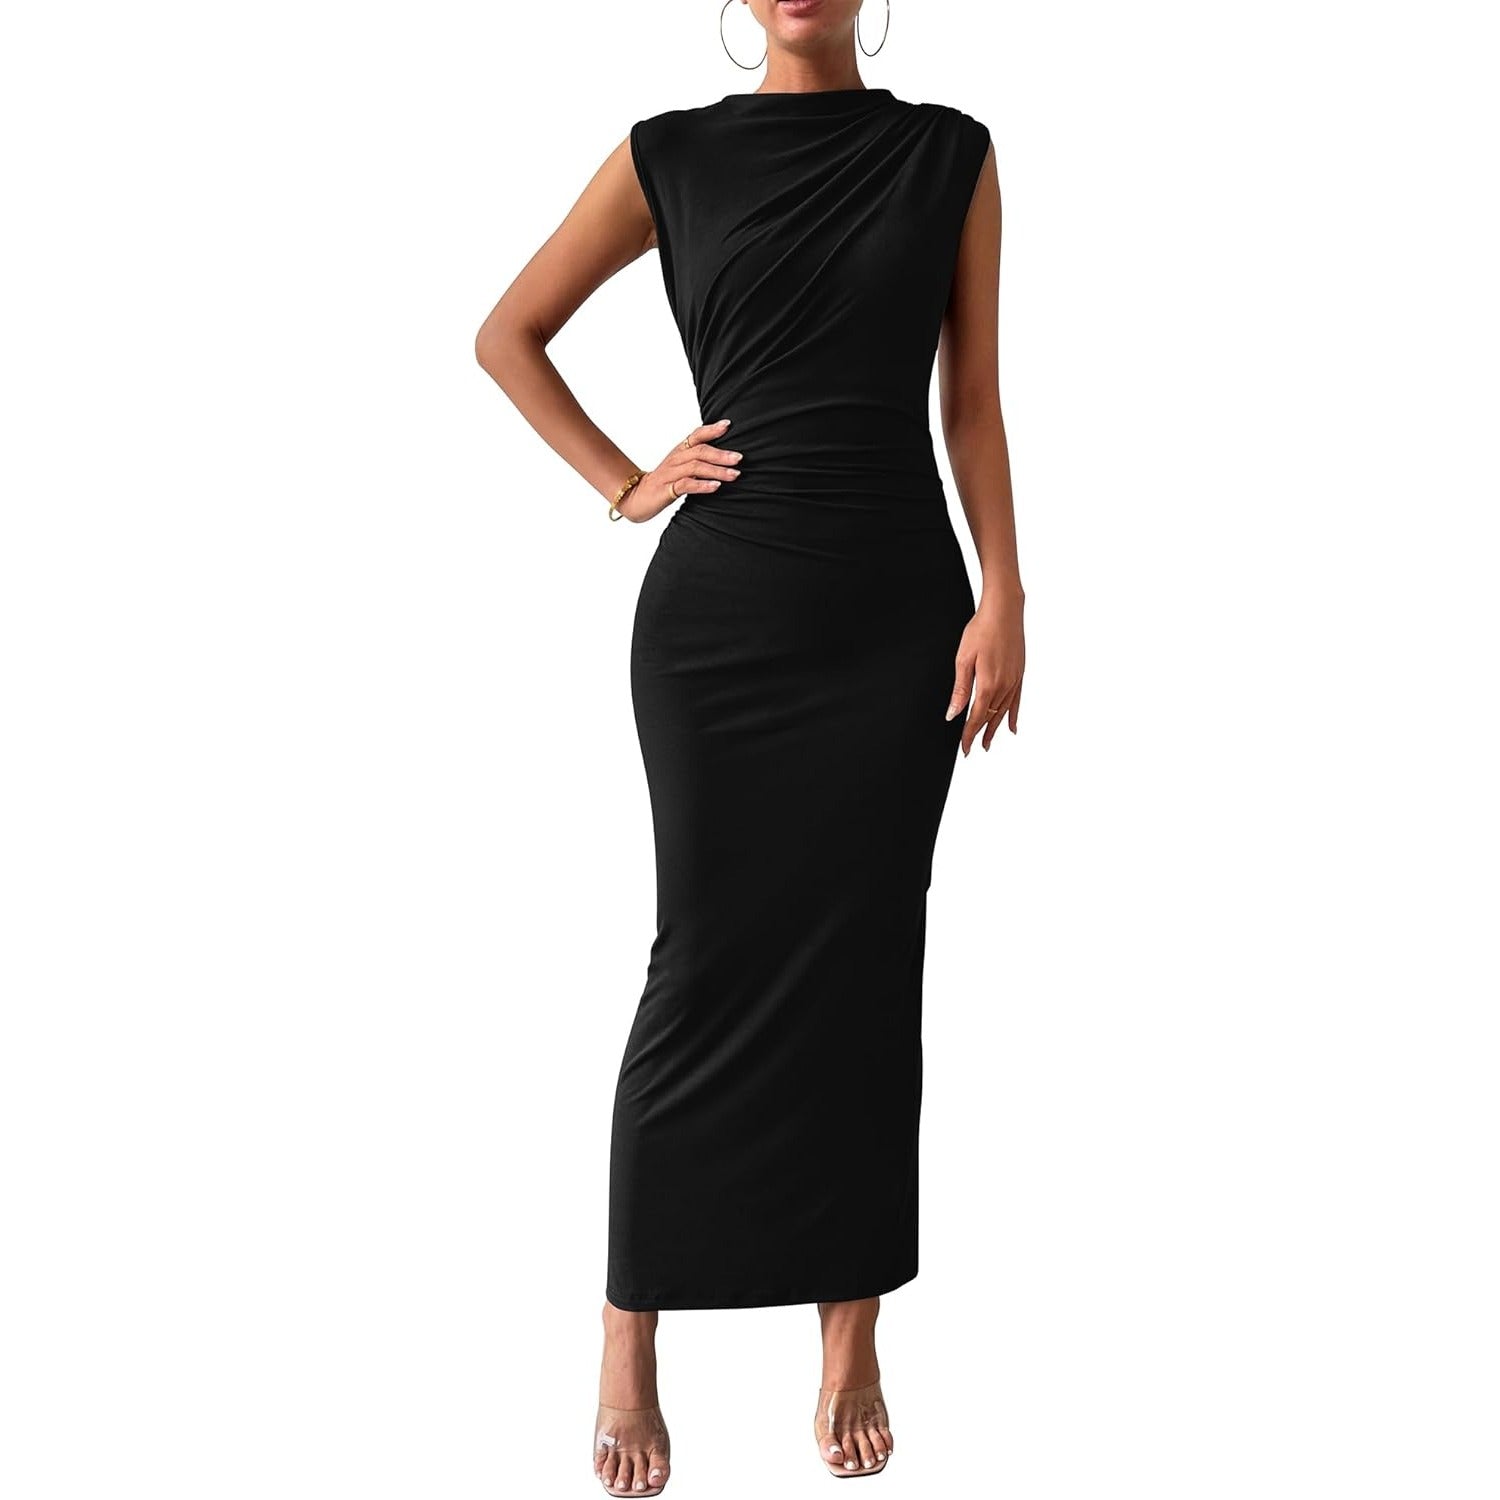 Women's Ruched Bodycon Dress Summer Casual Sleeveless Back Slit Elegant Club Evening Party Cocktail Maxi Dresses